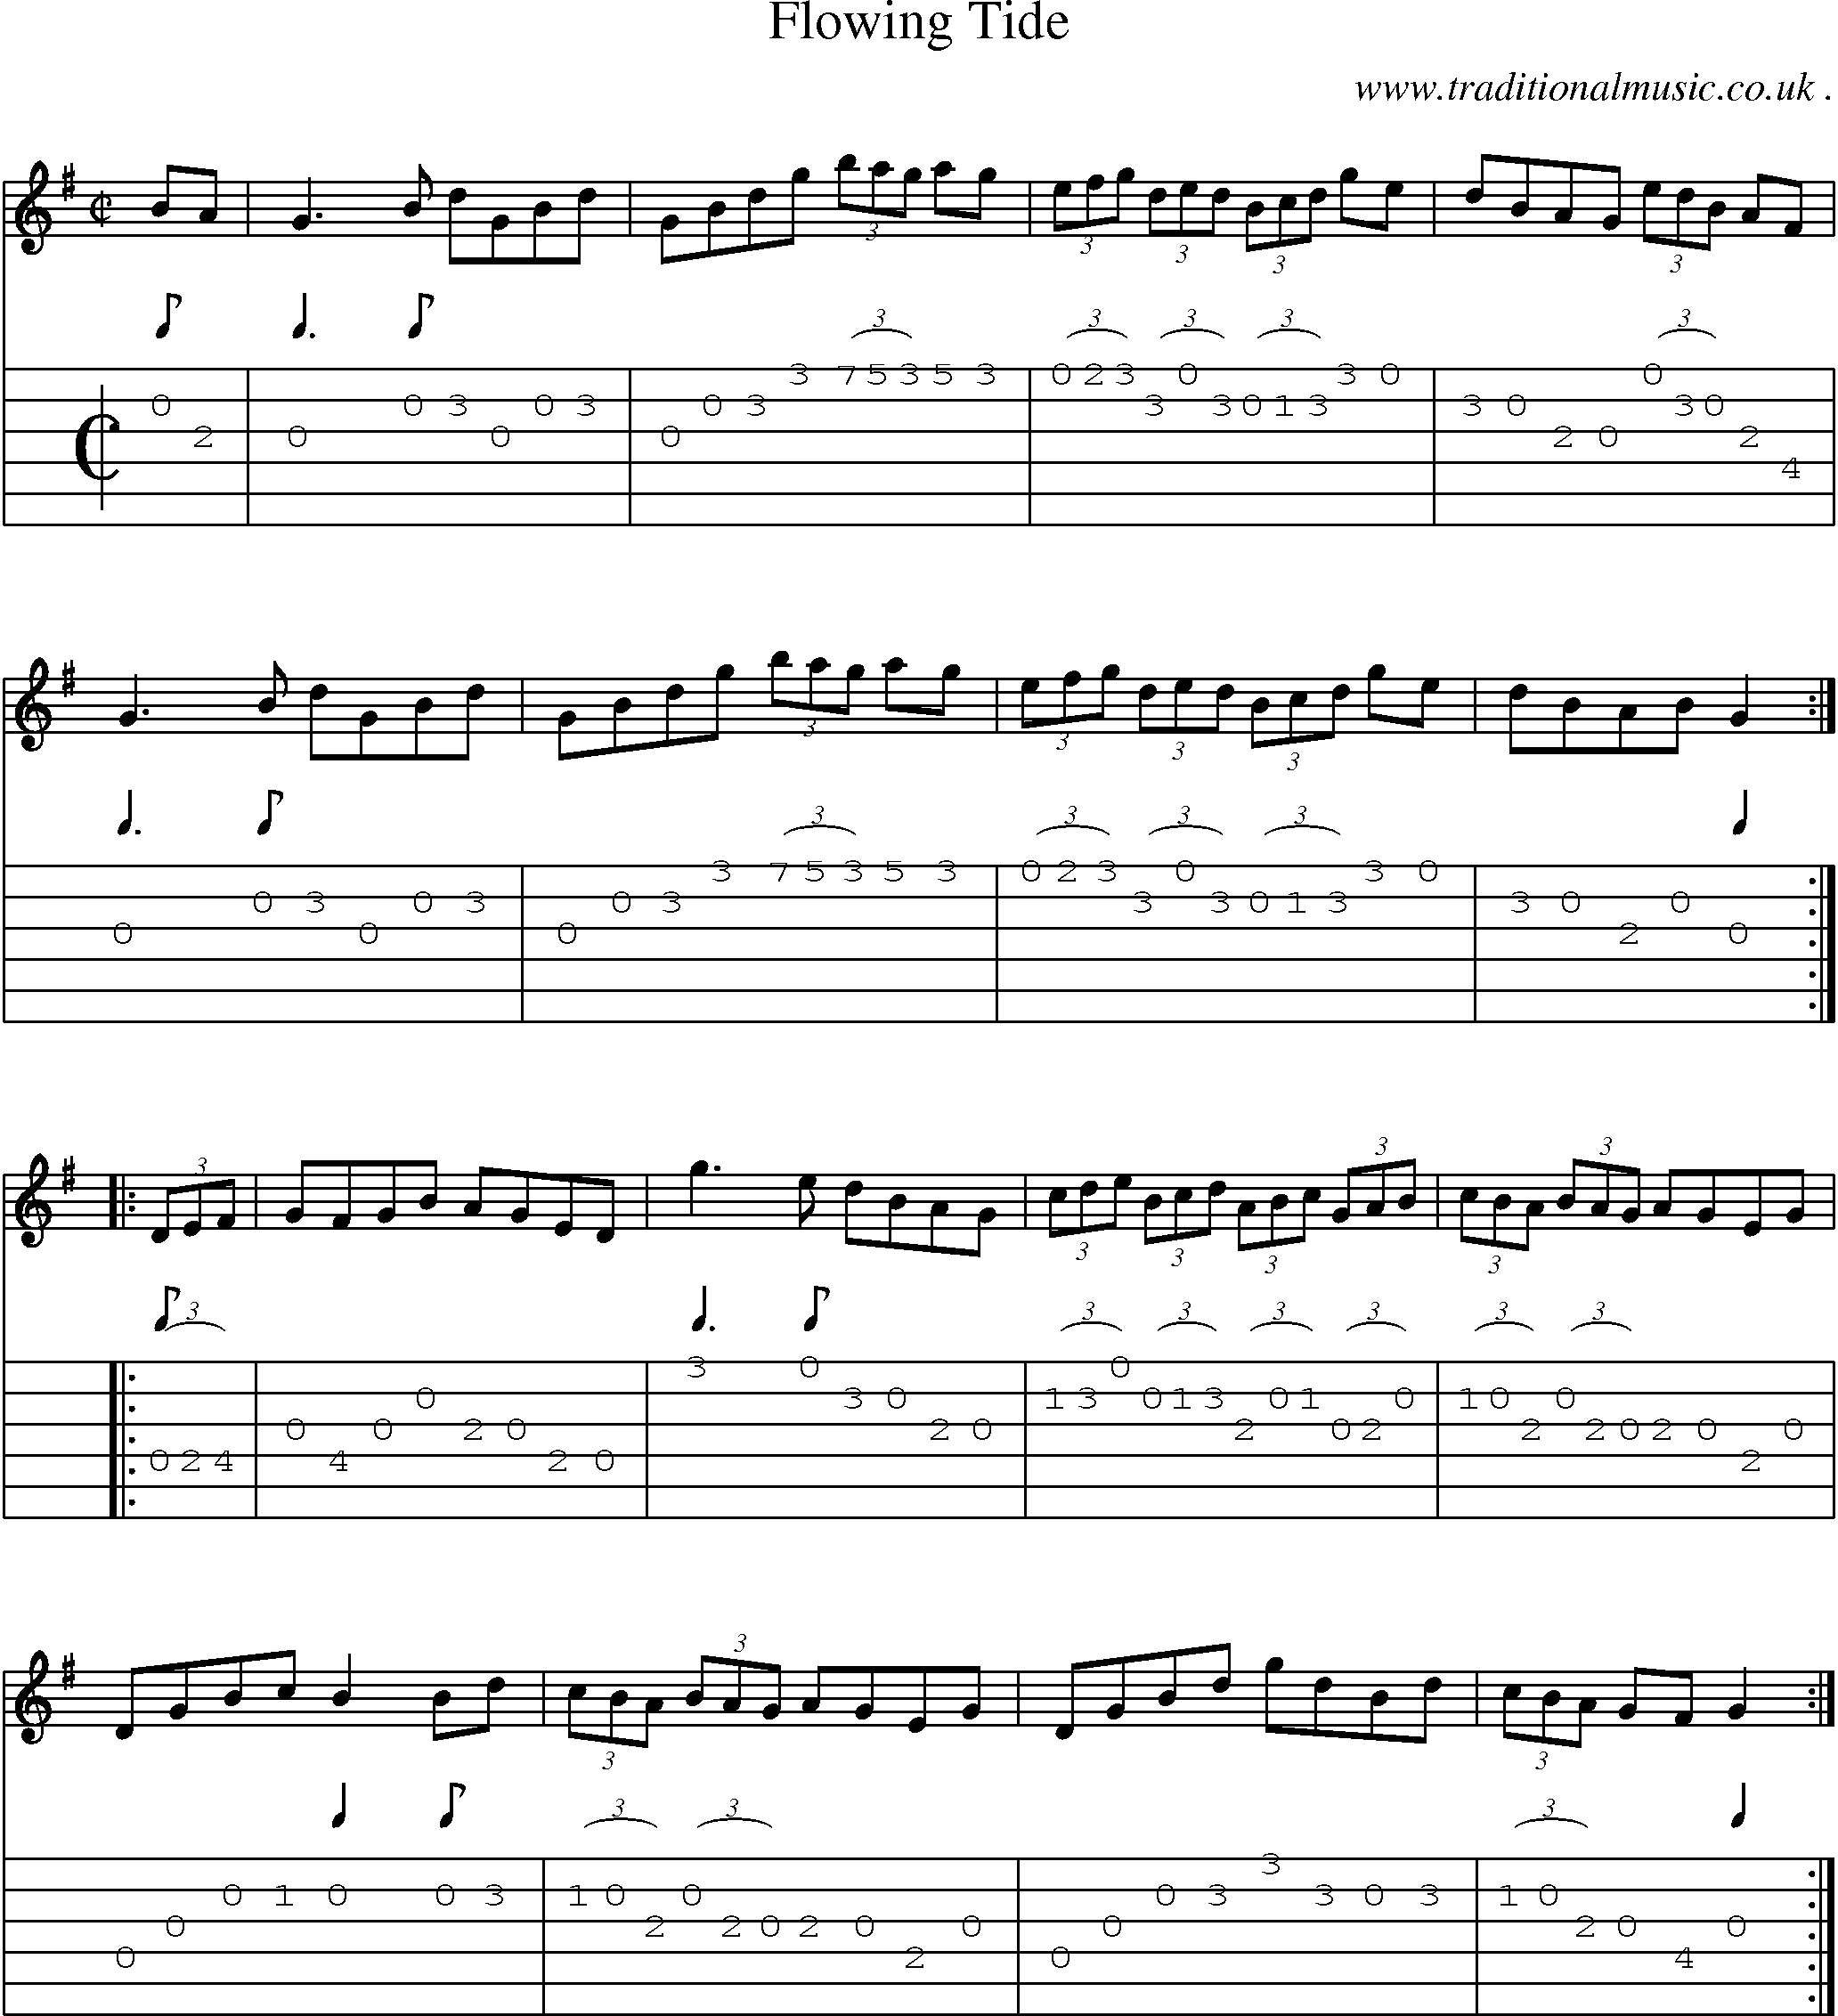 Sheet-Music and Guitar Tabs for Flowing Tide